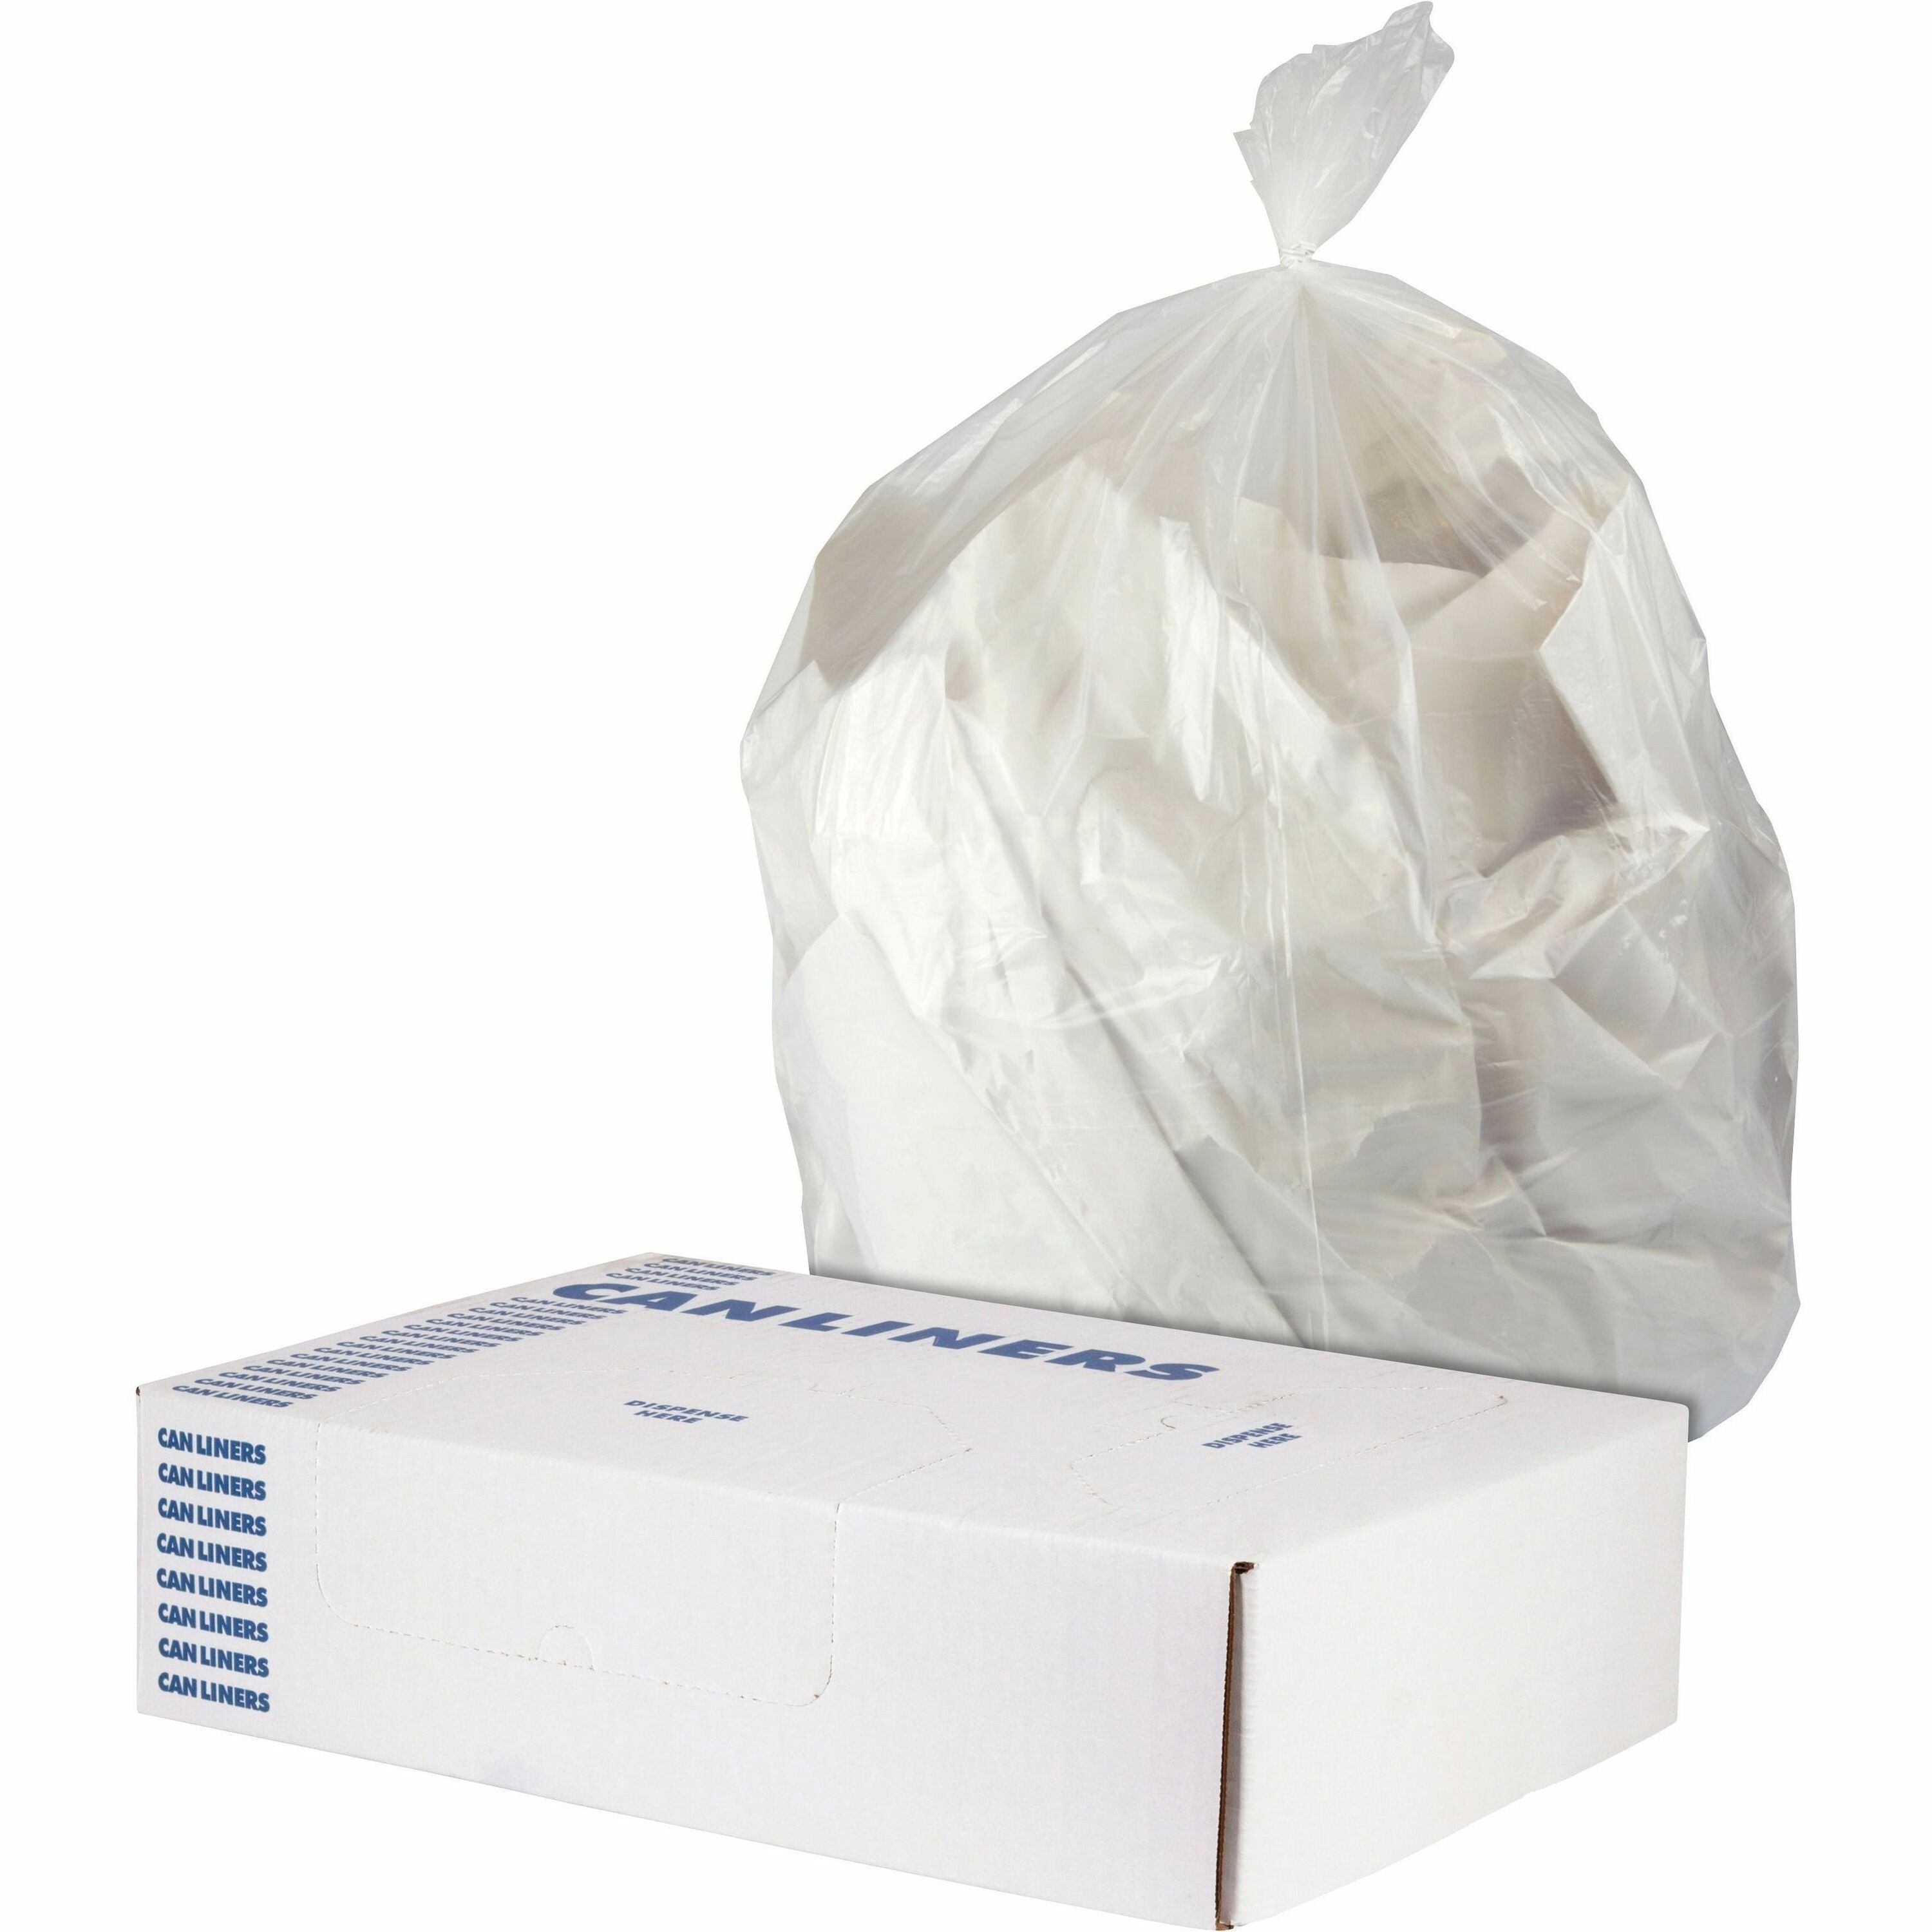 Heritage Trash Bag - 16 gal Capacity - 24" Width - 0.90 mil (23 Micron) Thickness - Low Density - Clear - Low Density Polyethylene (LDPE), Resin - 500/Case - Garbage Can, Industrial - 1